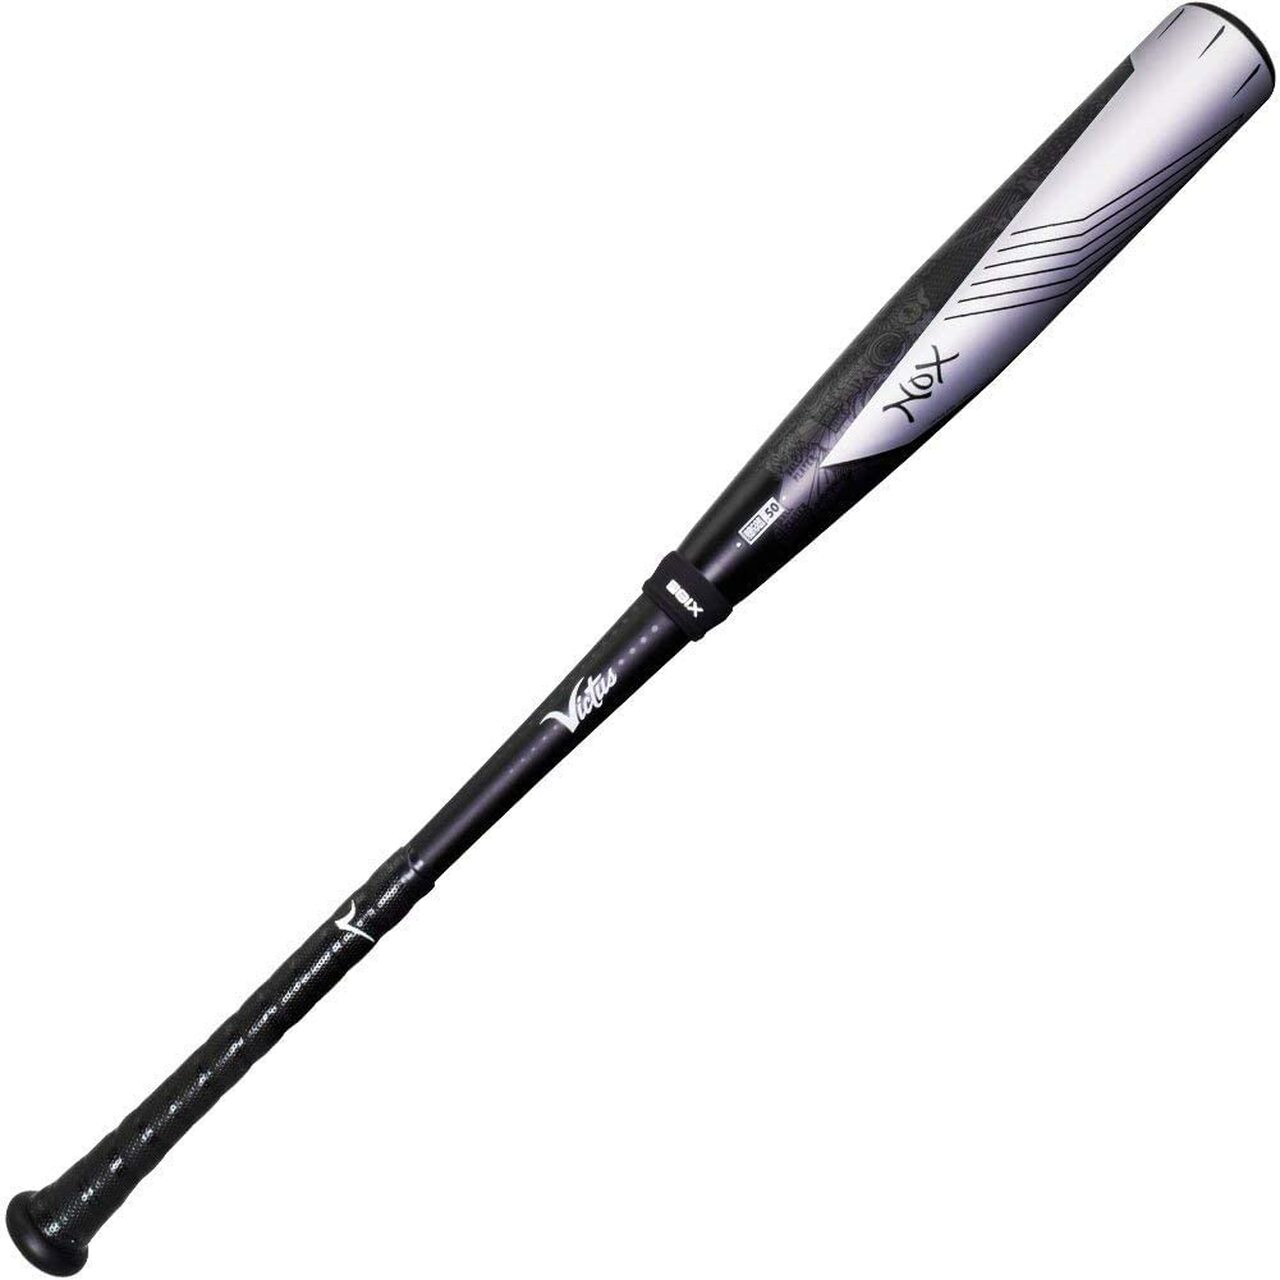 victus-nox-3-baseball-bat-31-inch-28-oz VCBN-3128 Victus  <span>Two-piece hybrid design built with a carbon composite handle and military-grade